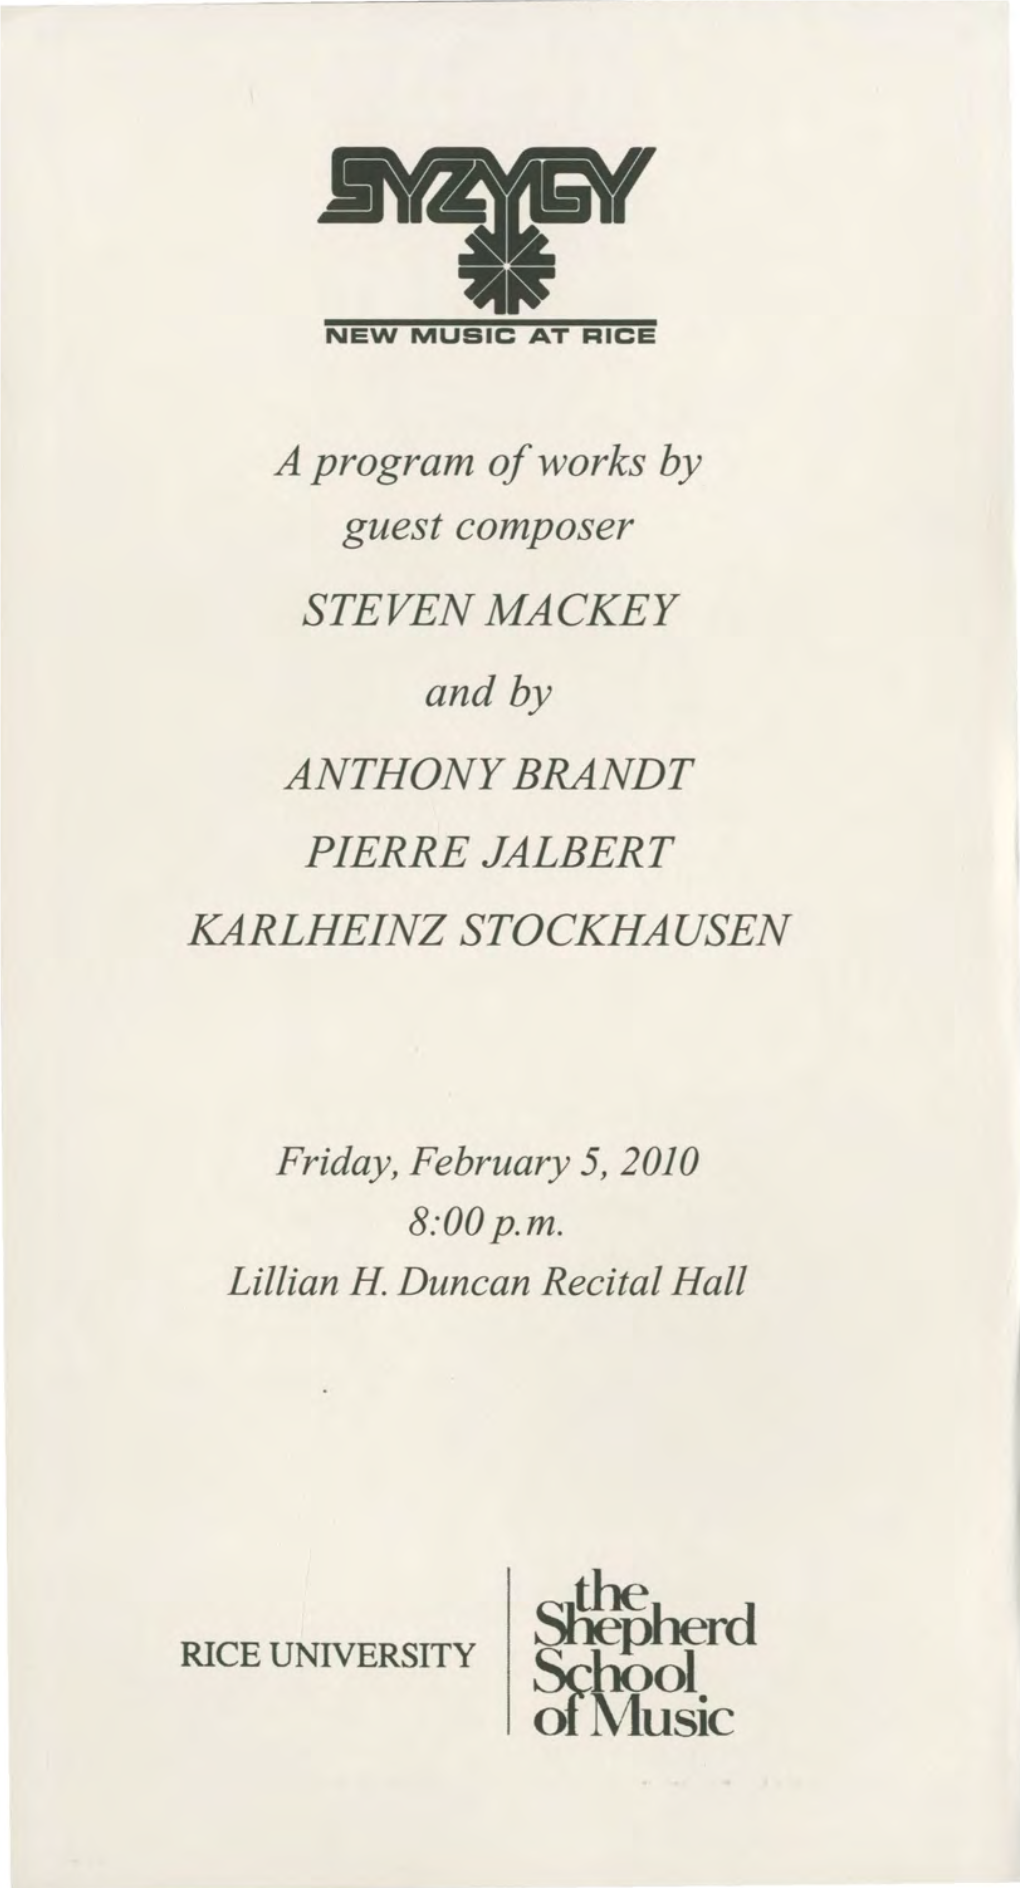 A Program of Works by Guest Composer STEVEN MACKEY and by ANTHONY BRANDT PIERRE JALBERT KARLHEINZ STOCKHAUSEN